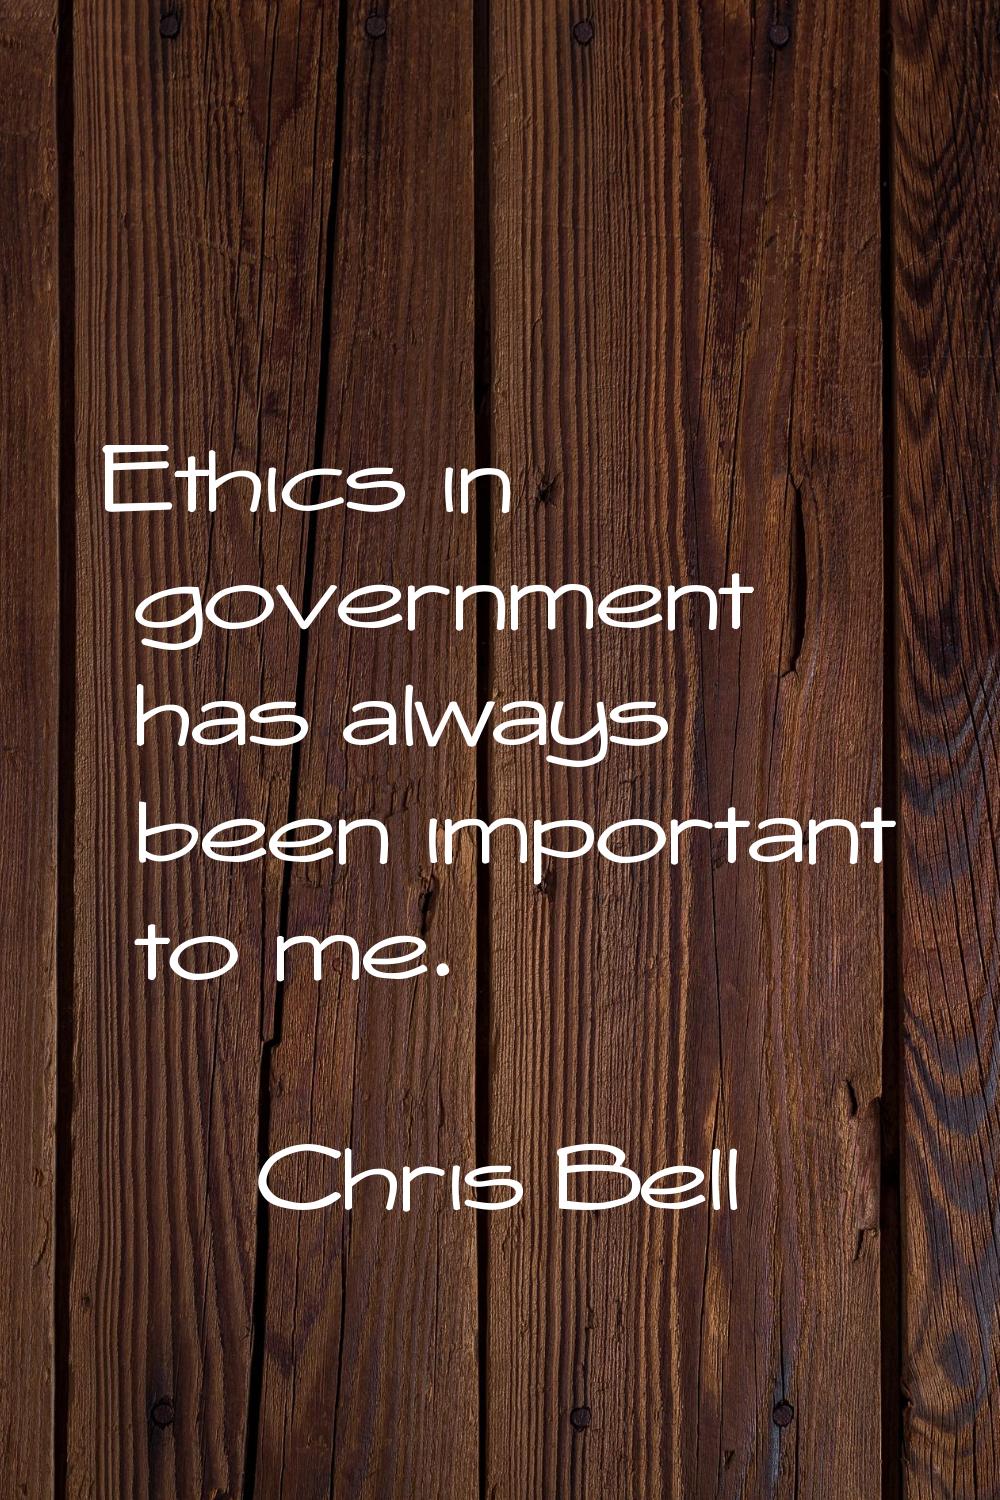 Ethics in government has always been important to me.